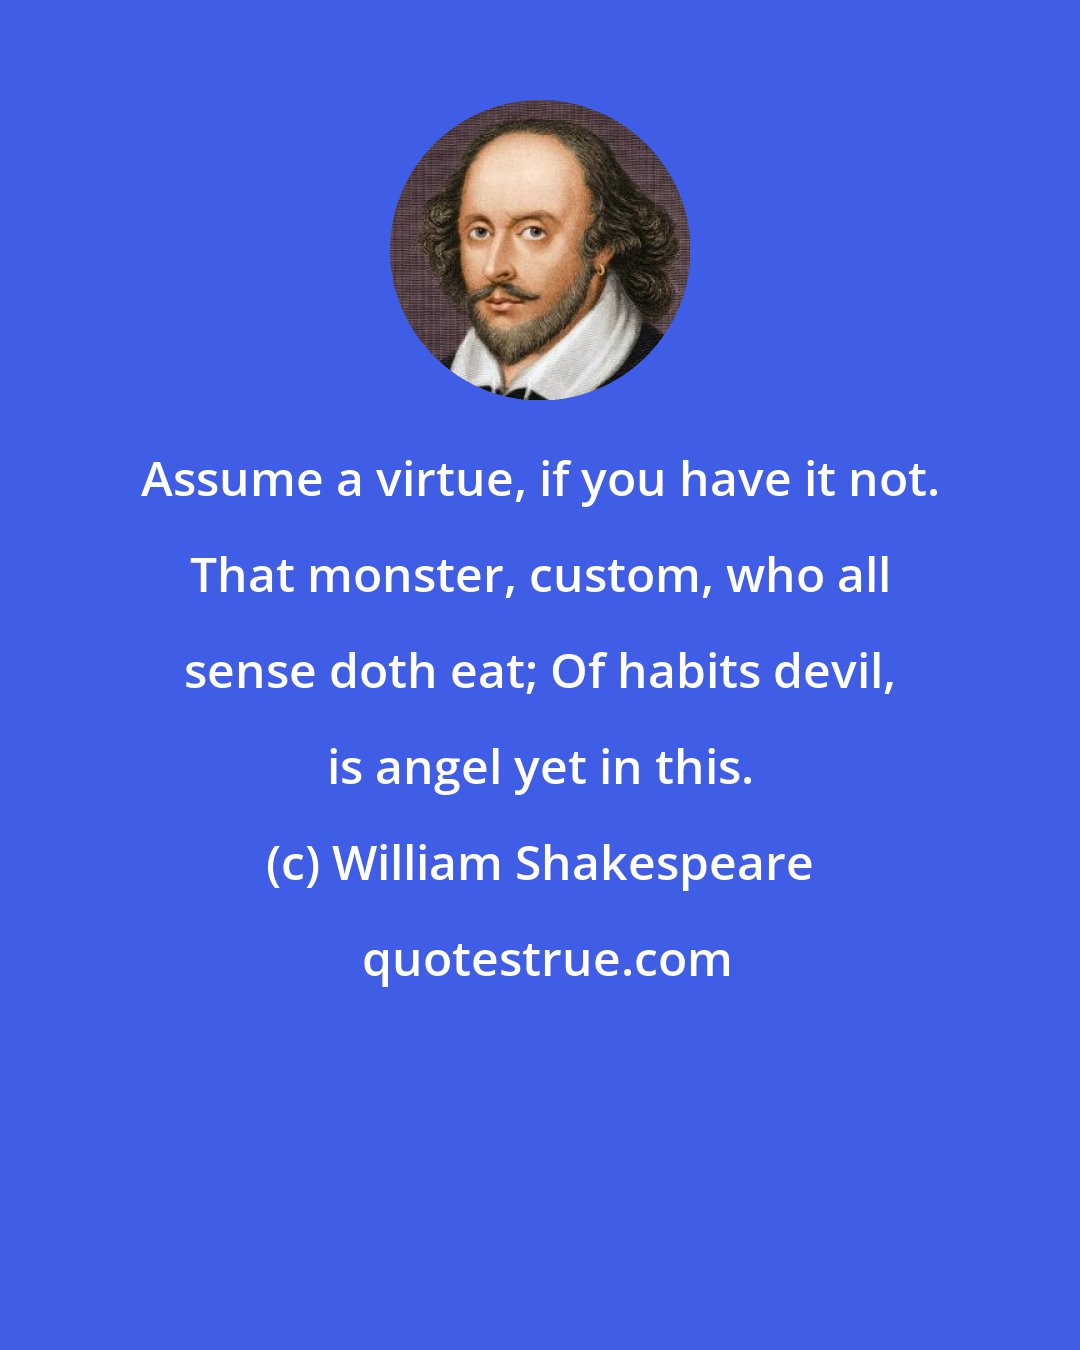 William Shakespeare: Assume a virtue, if you have it not. That monster, custom, who all sense doth eat; Of habits devil, is angel yet in this.